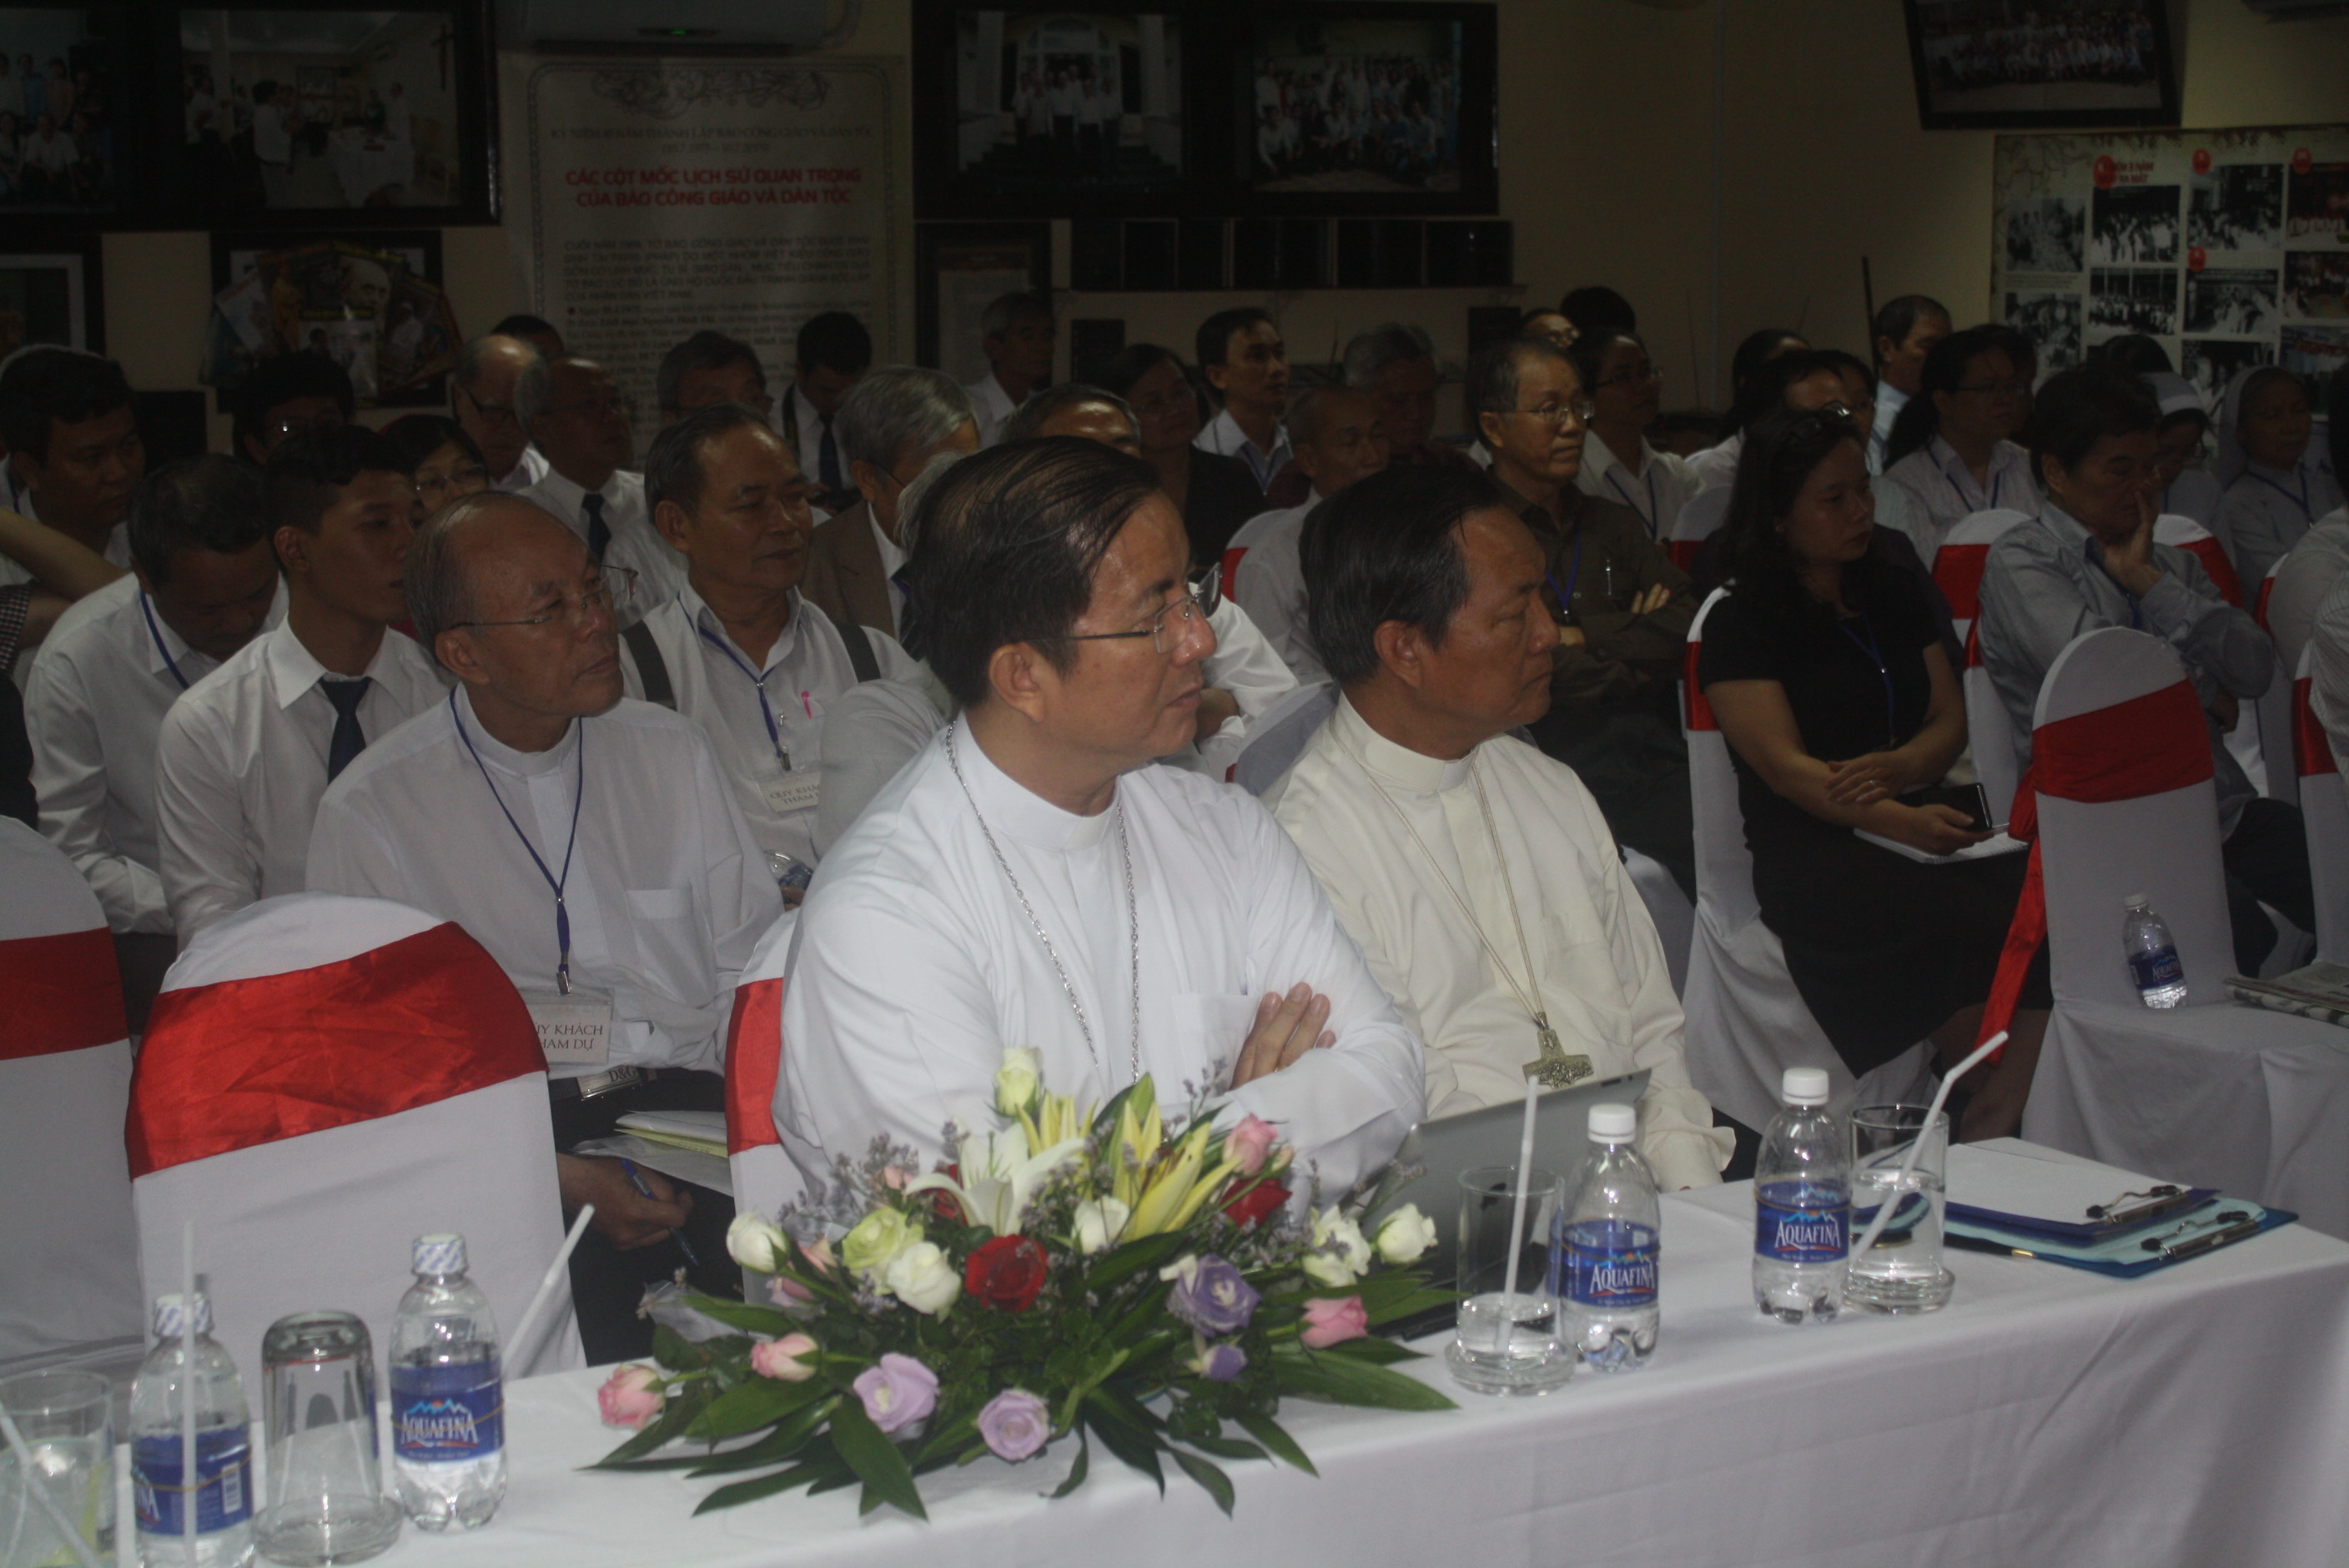 Seventy clergy, religious, laypeople and representatives of other faiths attended the gathering on June 26. (Joachim Pham)